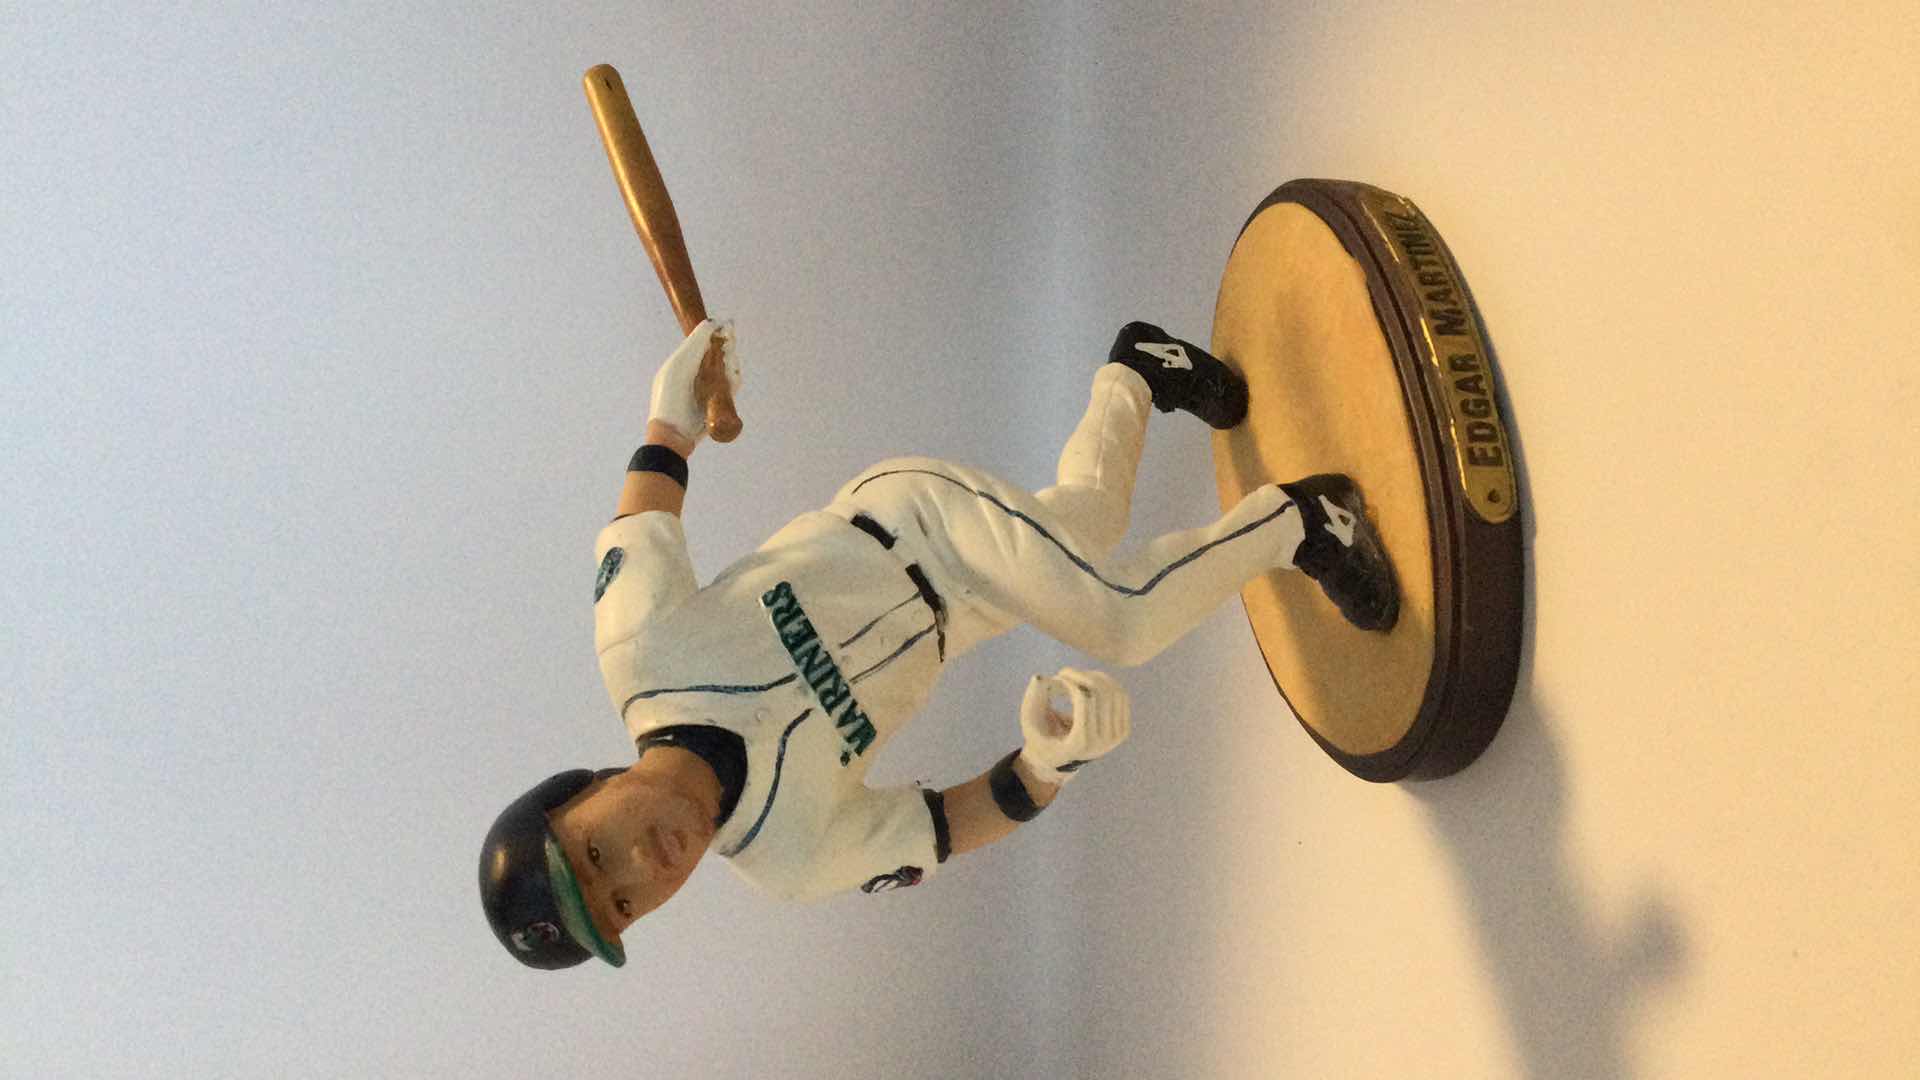 Photo 2 of EDGAR MARTÍNEZ COLLECTIBLE STATUE “THE DOUBLE”